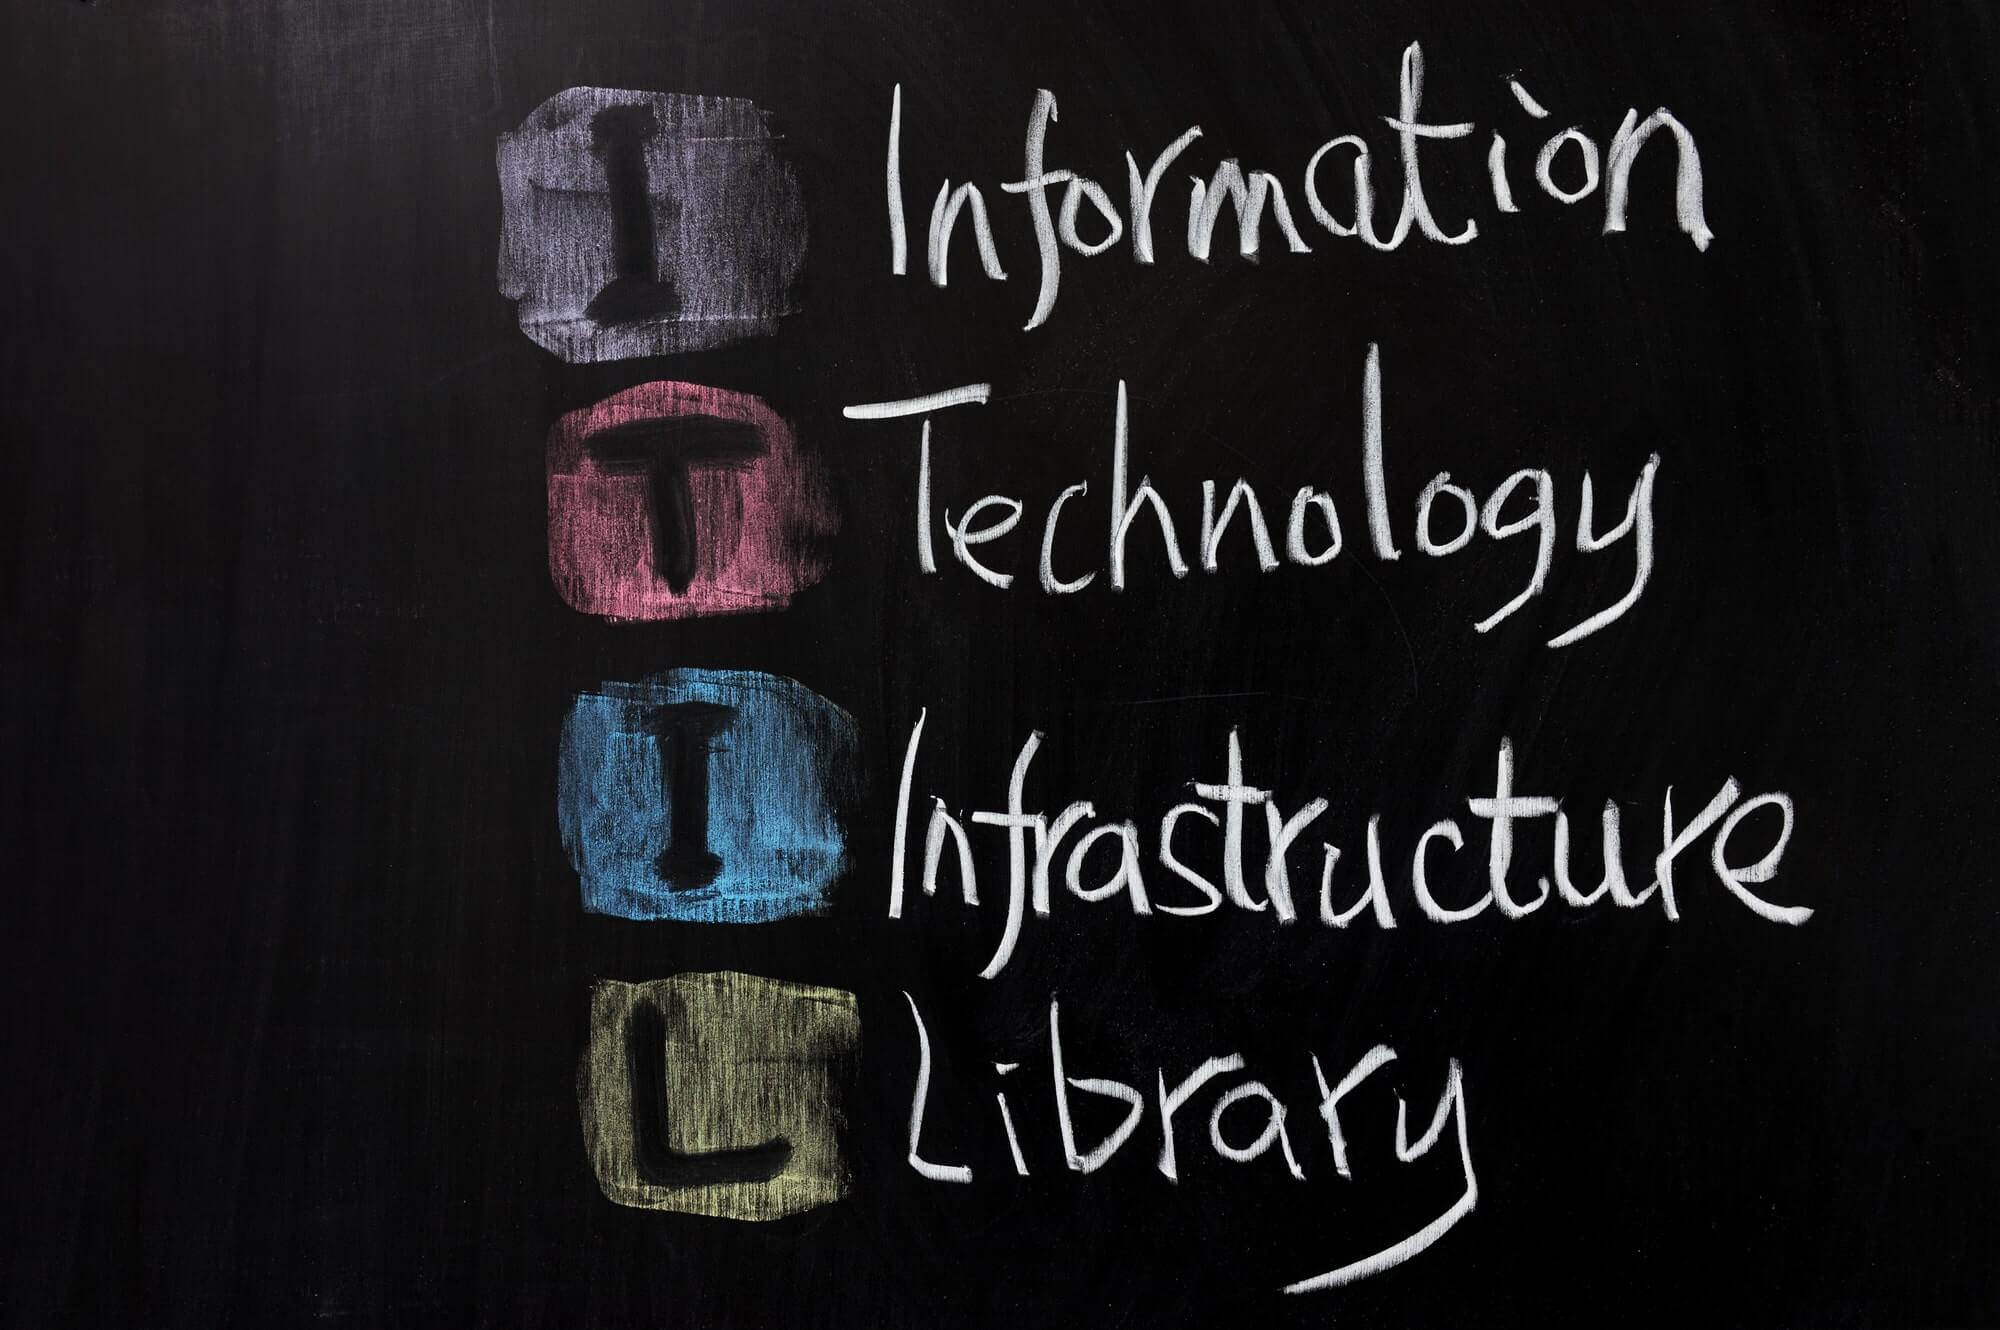 ITIL - Information Technology Infrastructure Library